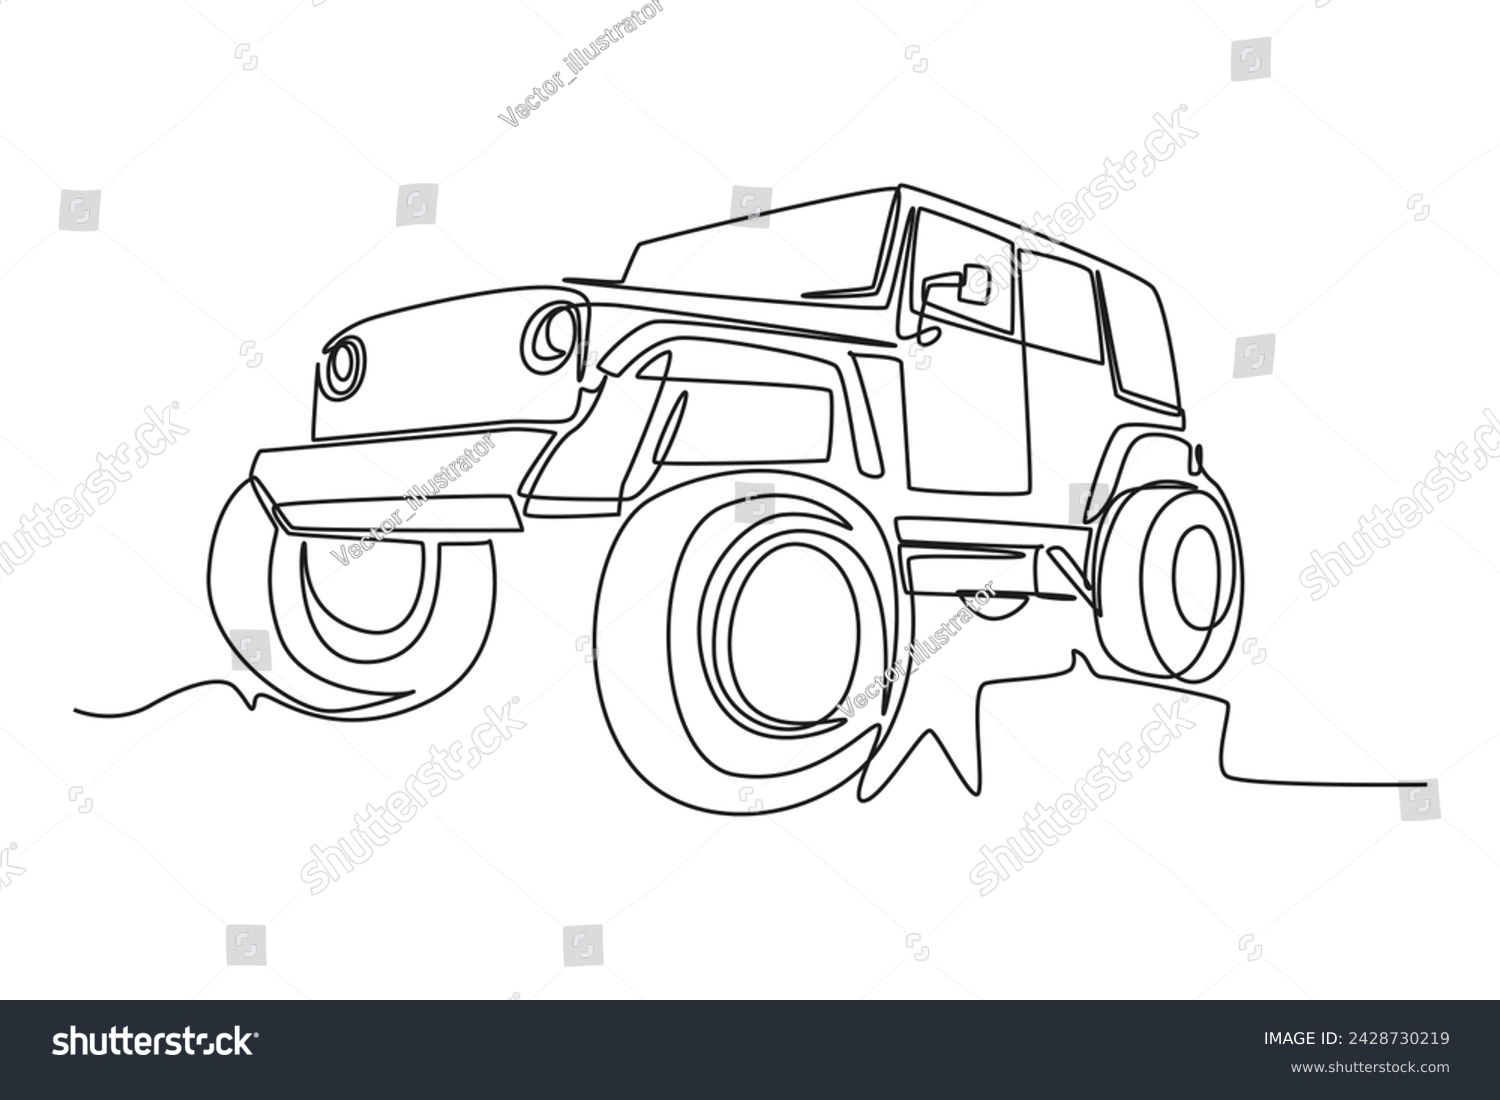 SVG of Single line drawing of tough 4x4 speed jeep wrangler car. Adventure offroad rally vehicle transportation concept. One continuous line draw design svg